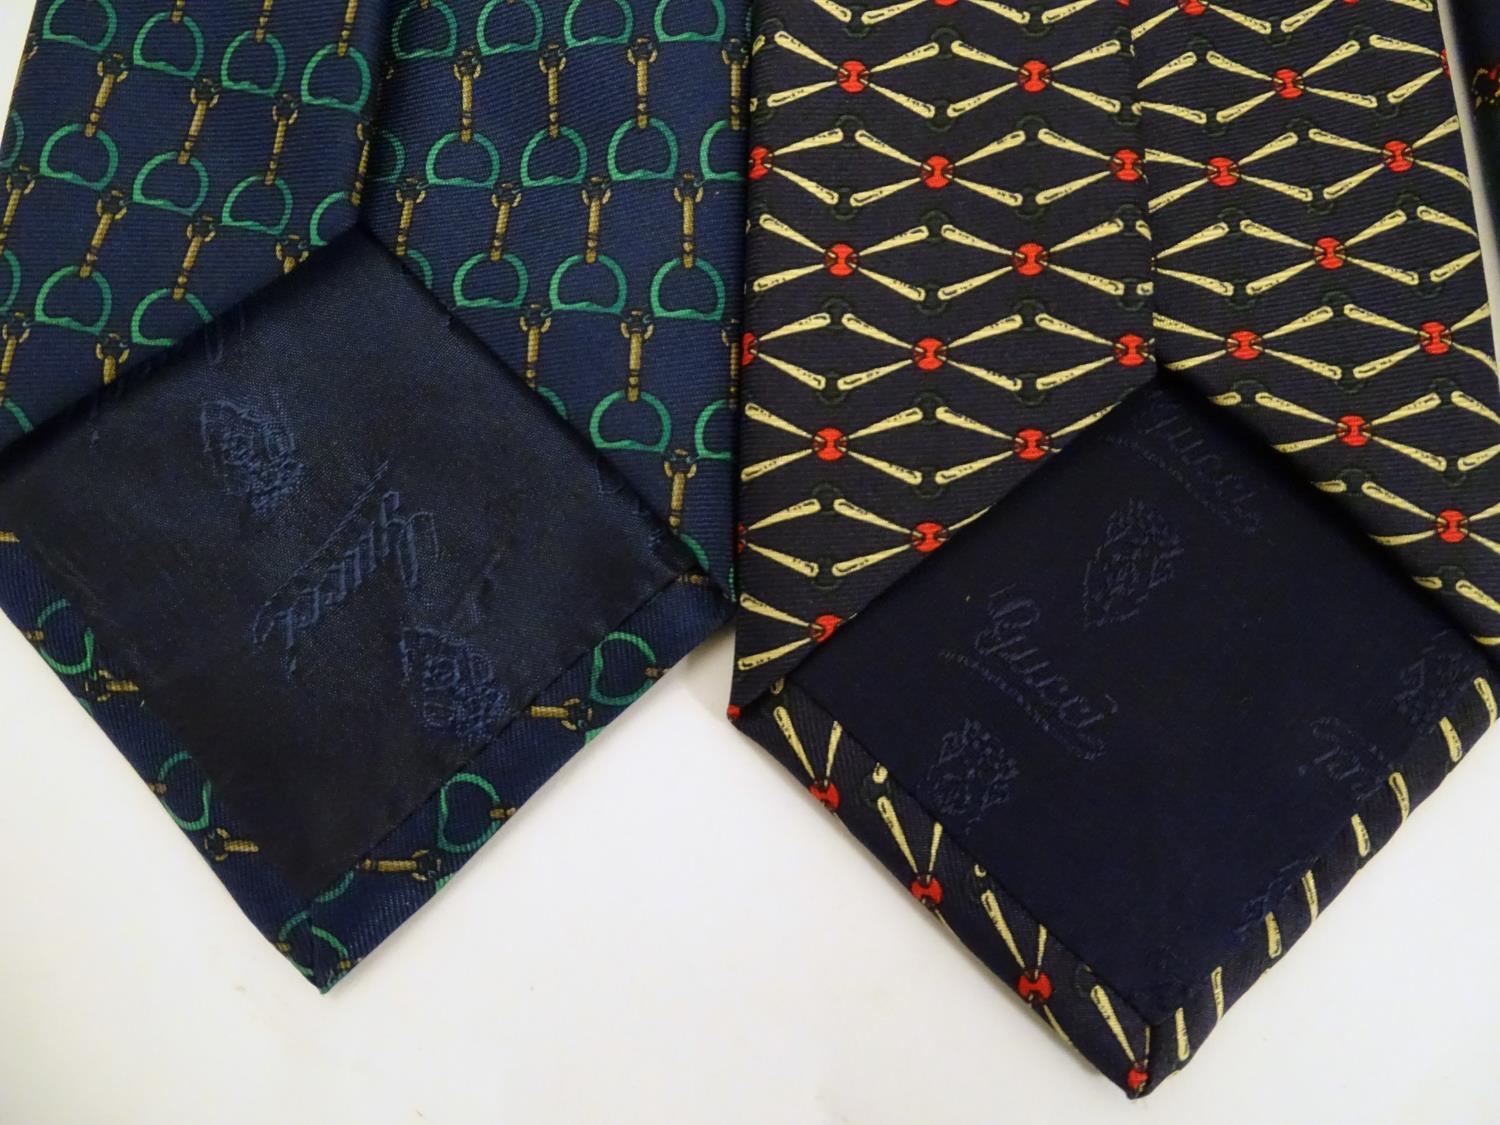 4 Gucci silk ties, various designs in greens, black and blues (4) Please Note - we do not make - Image 6 of 7